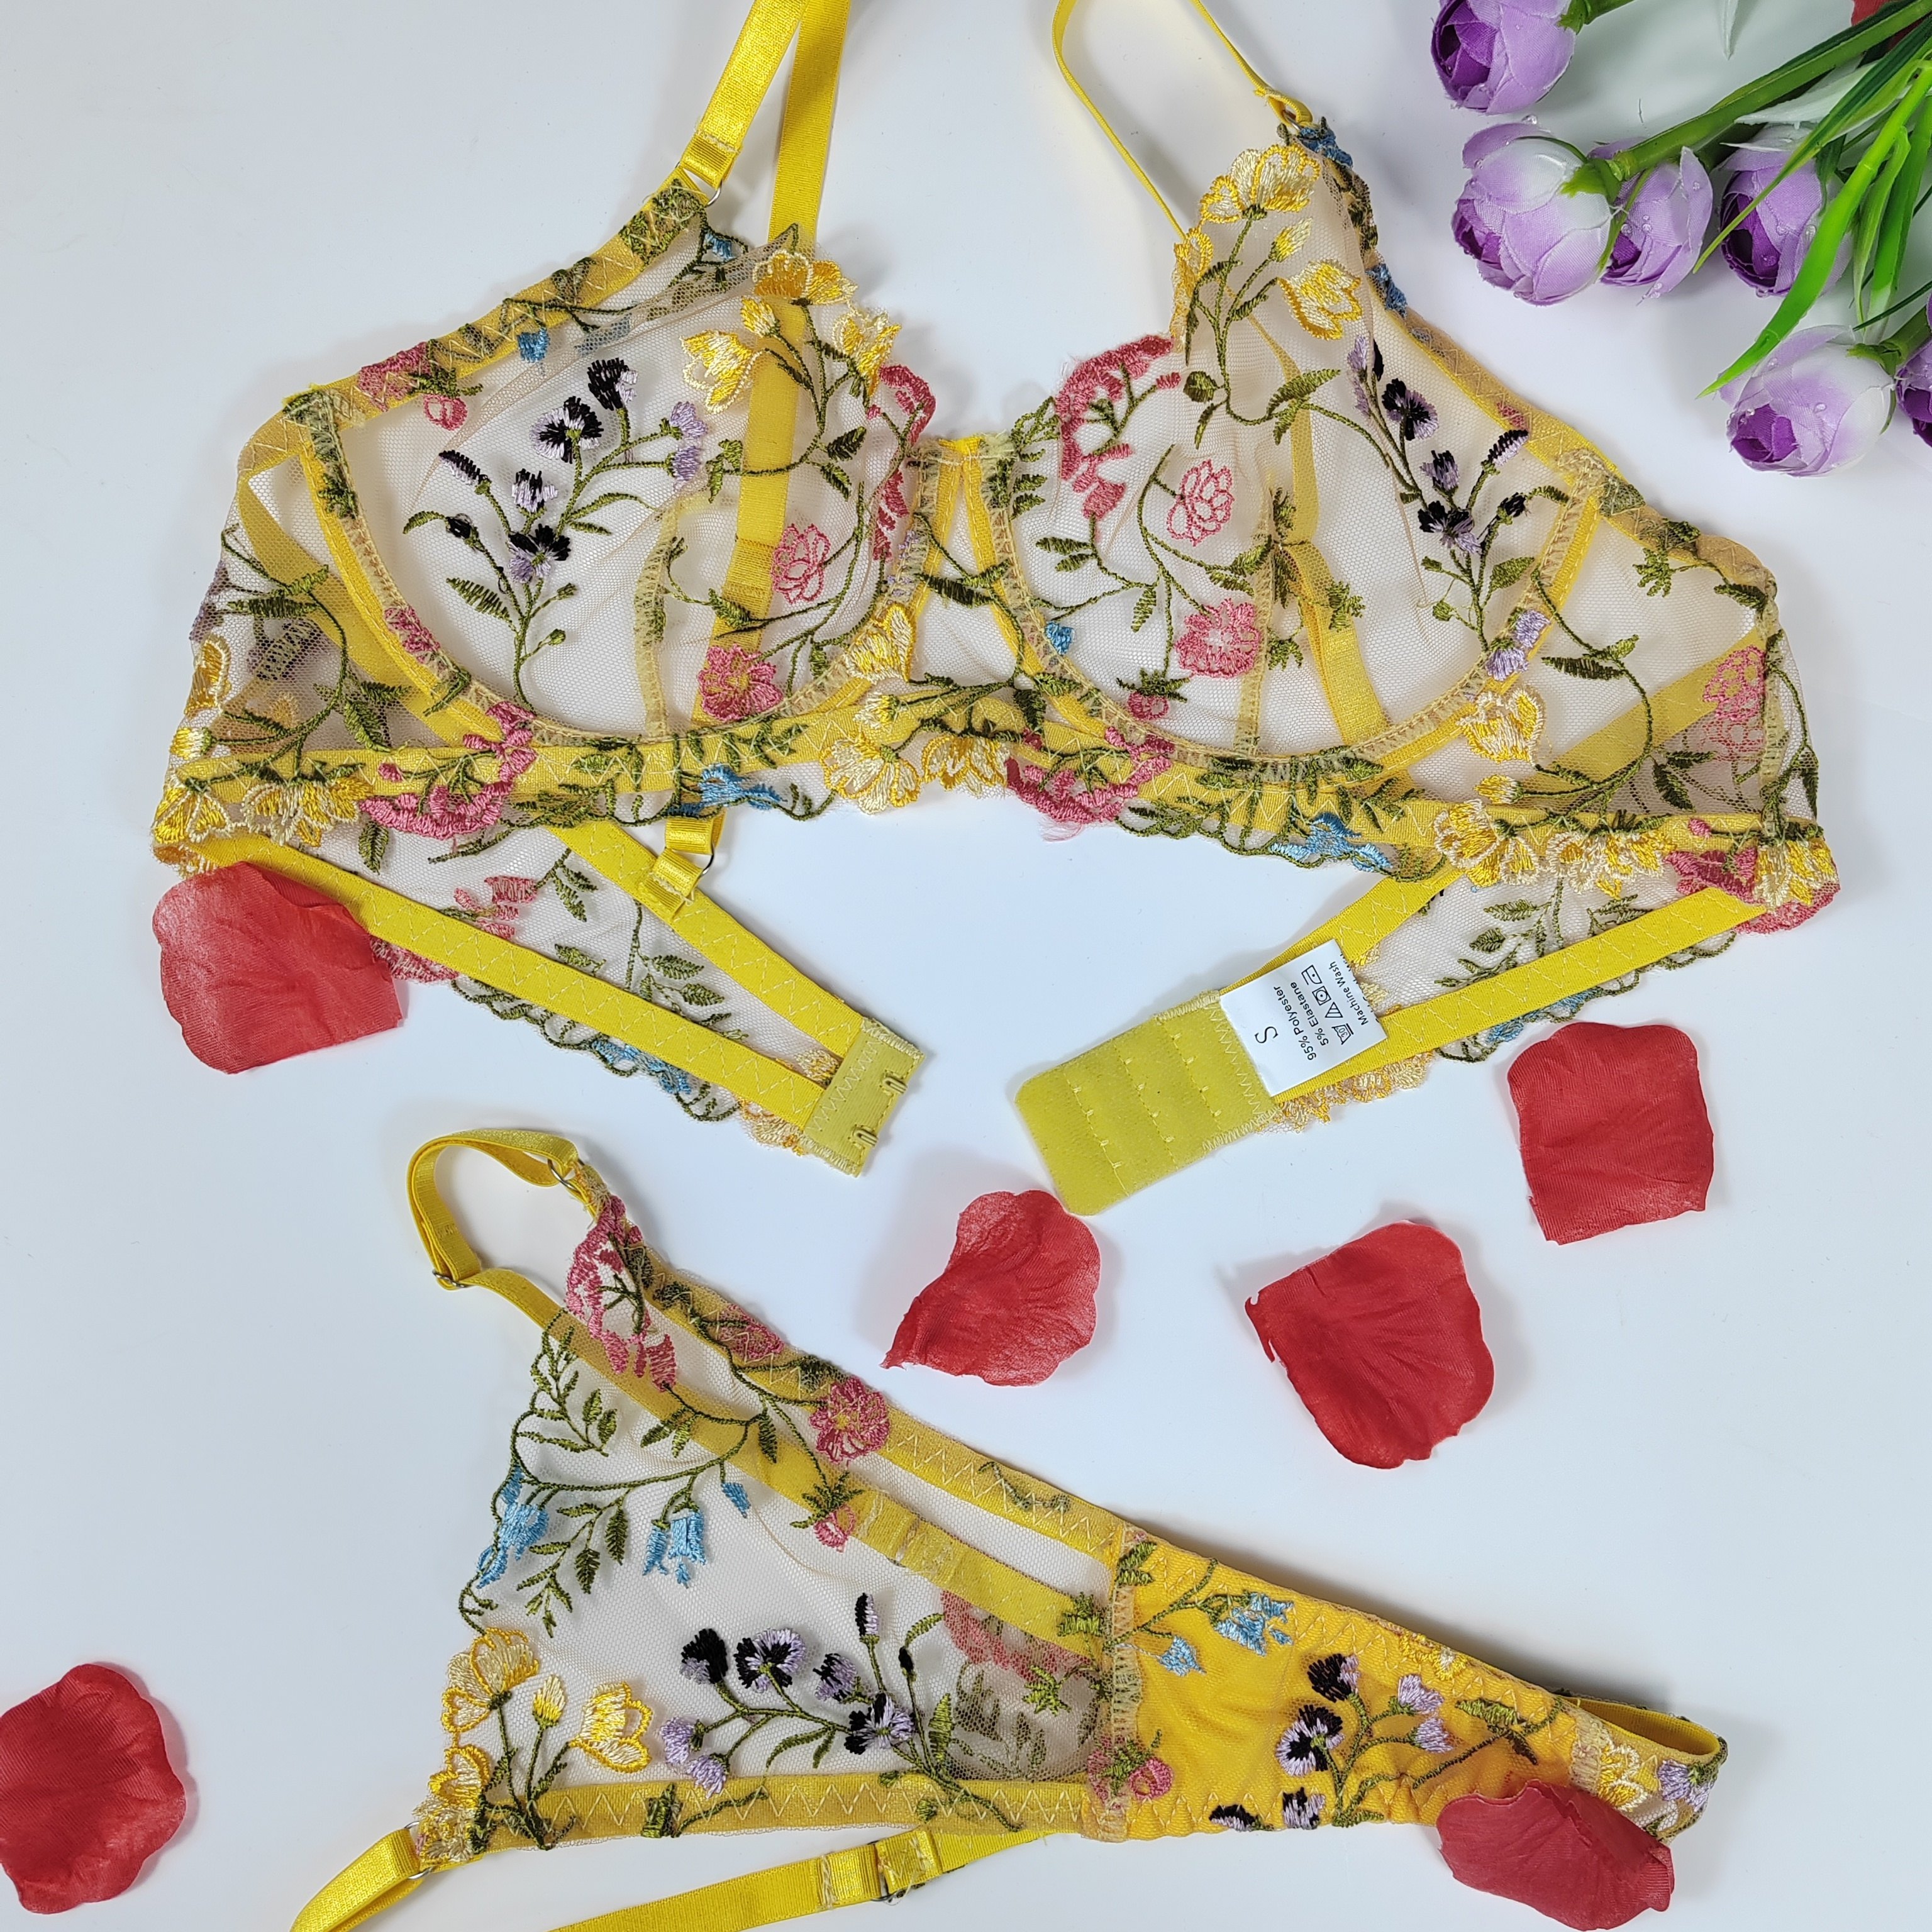 Sexy Floral Embroidery Lingerie Set - Sheer Mesh Push Up Bra and Thong  Panties for Women - Seductive Underwear for a Sensual Look